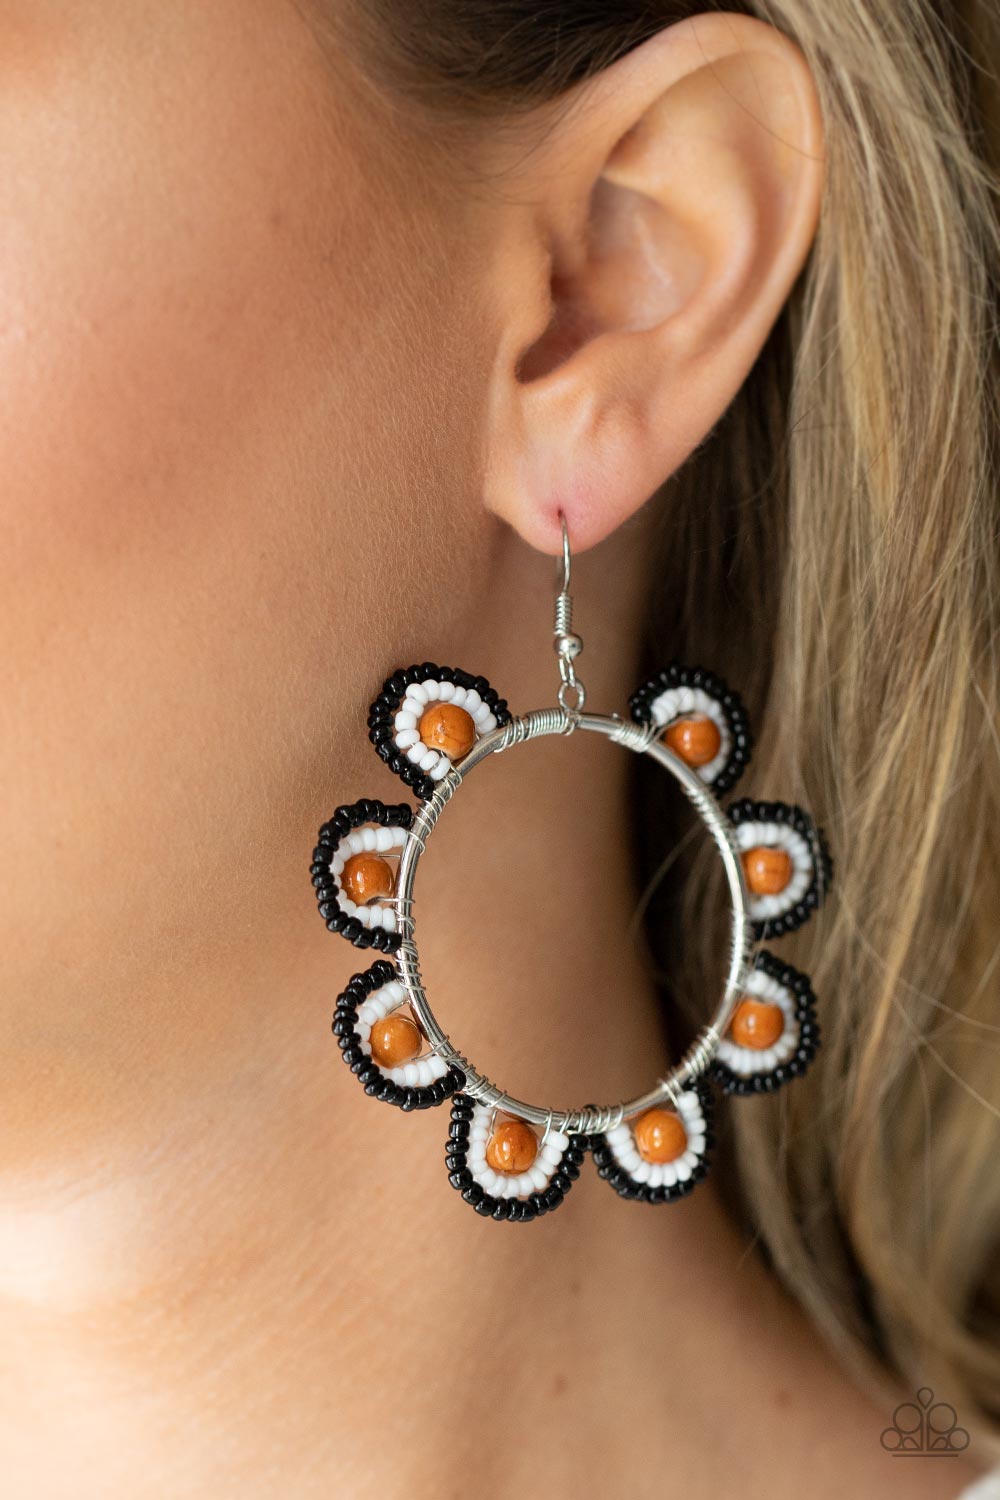 Groovy Gardens Brown Seed Bead Flower Earrings - Paparazzi Accessories-on model - CarasShop.com - $5 Jewelry by Cara Jewels